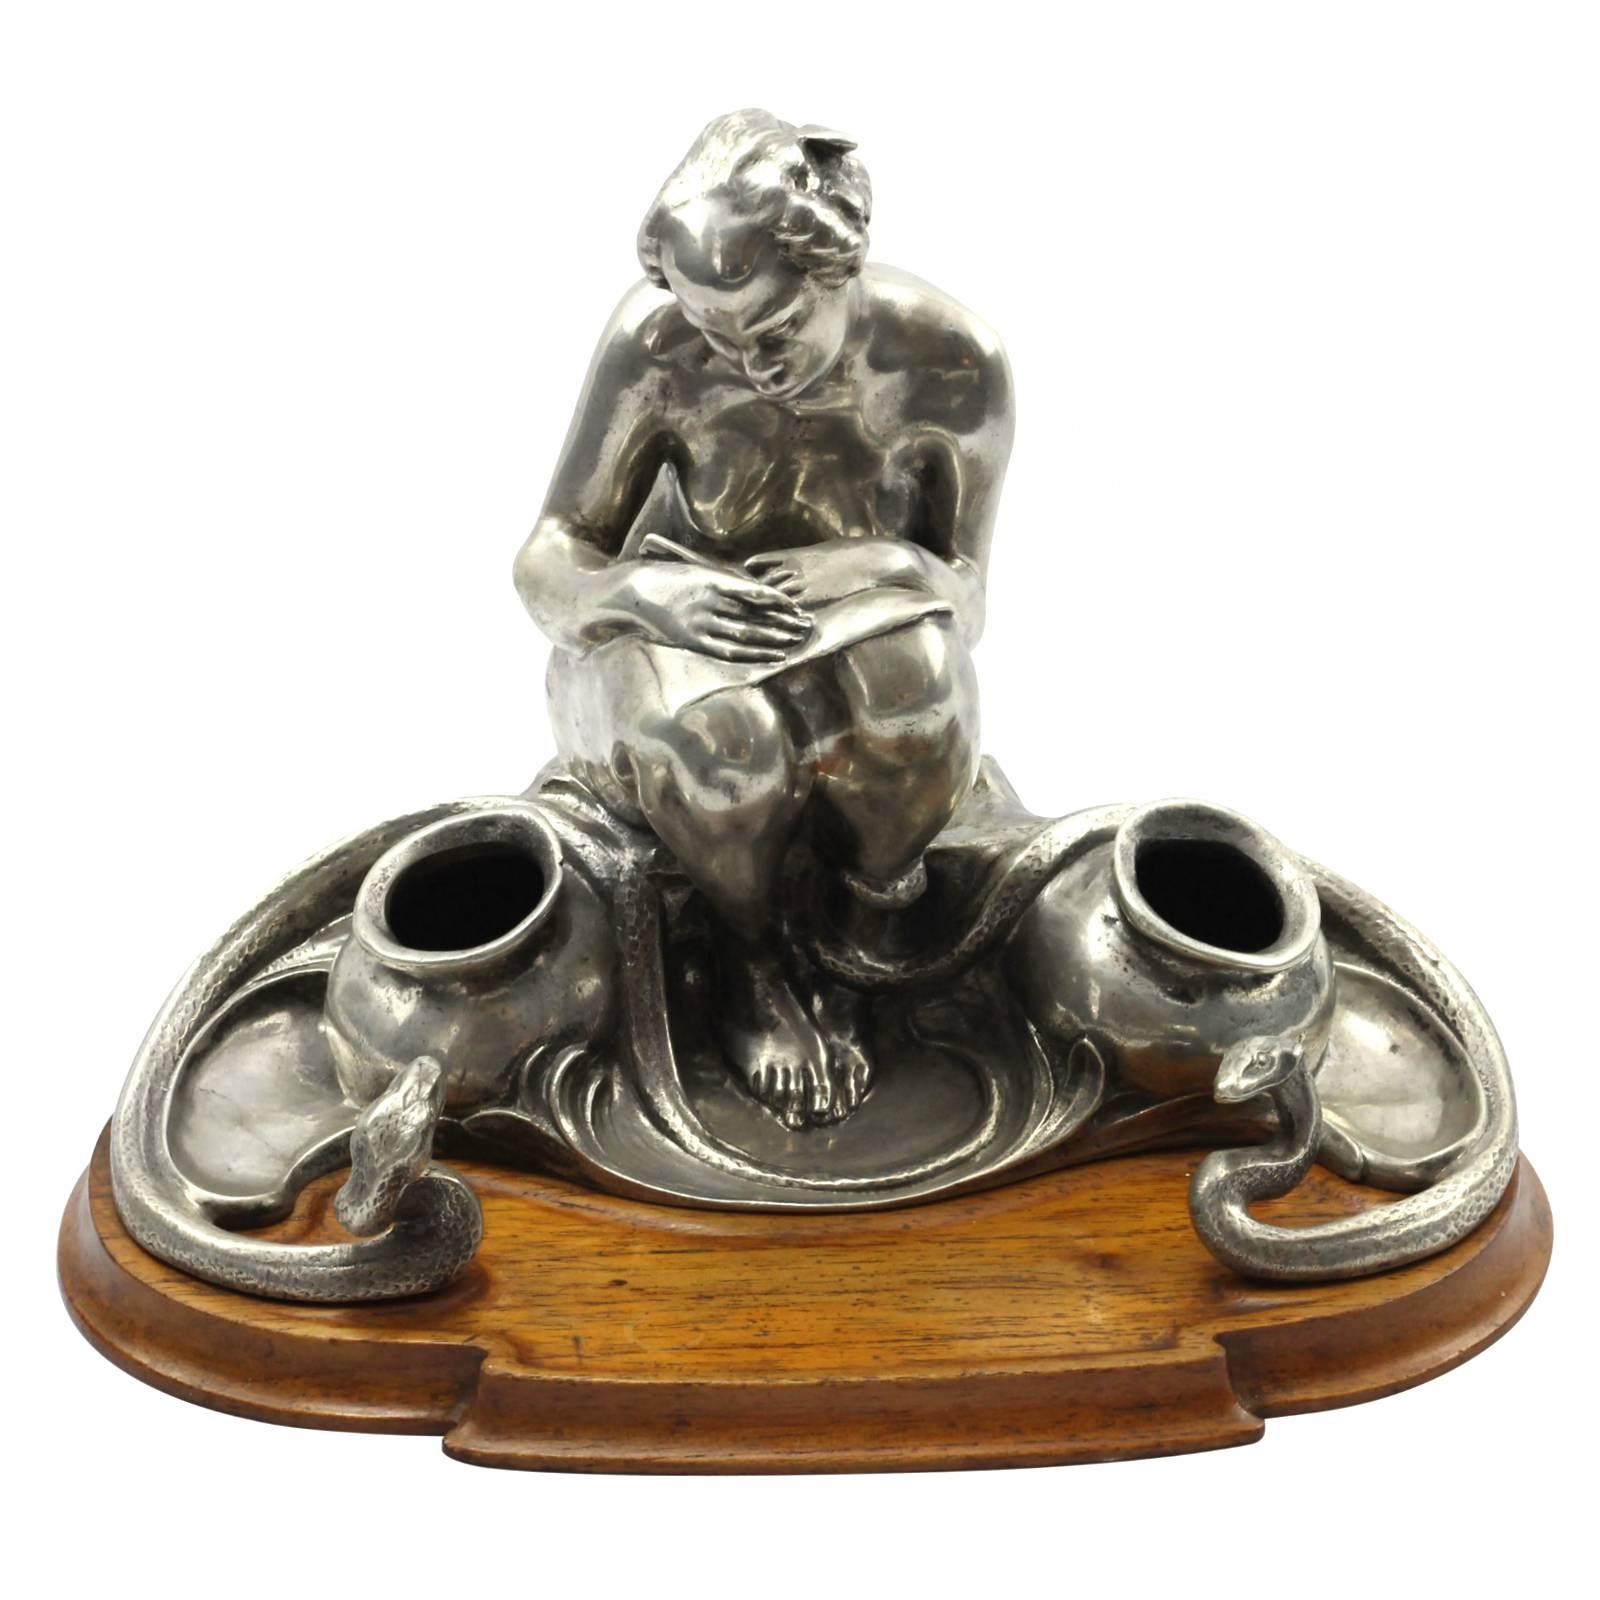 An early 20th century Art Nouveau .800 continental silver inkstand. The piece depicts a nude woman resting a piece of paper on her lap, with a pen in her hand. Beside her are two inkwells, and two serpents, one of which has its tail wrapped around